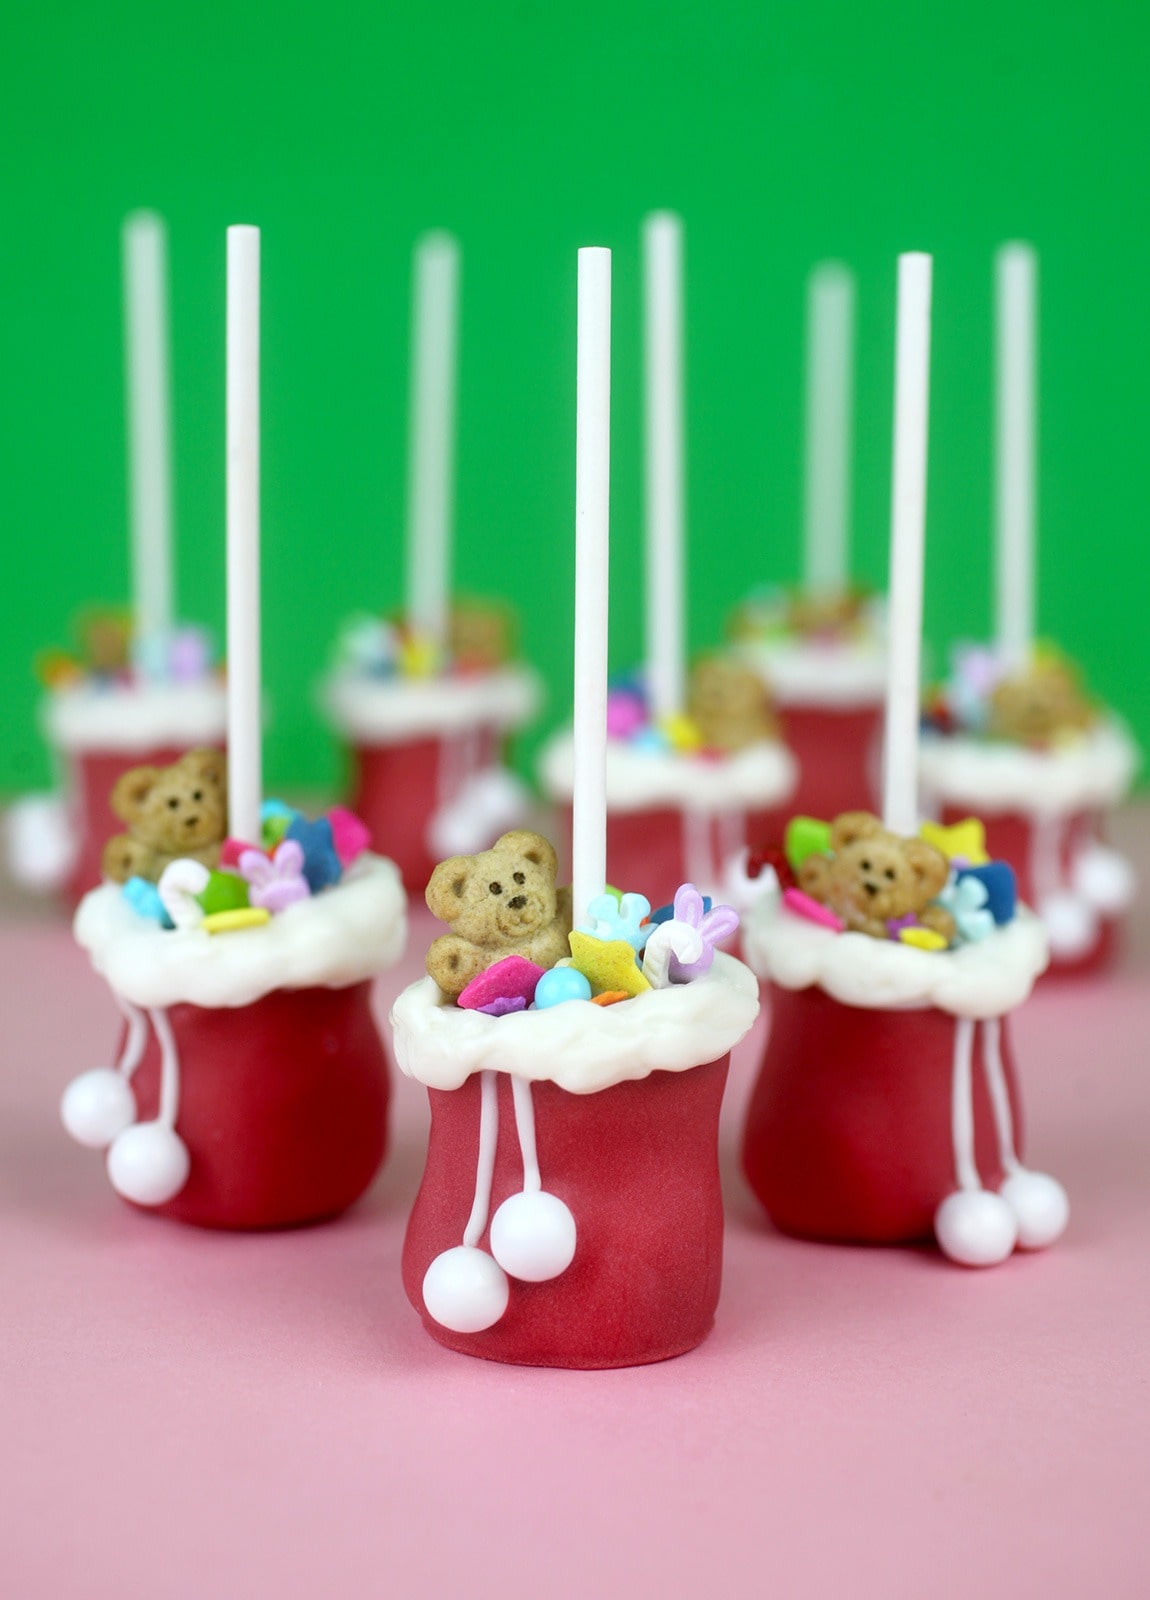 Santa bags inspired cake pops with teddy bear candies and sprinkles inside. 